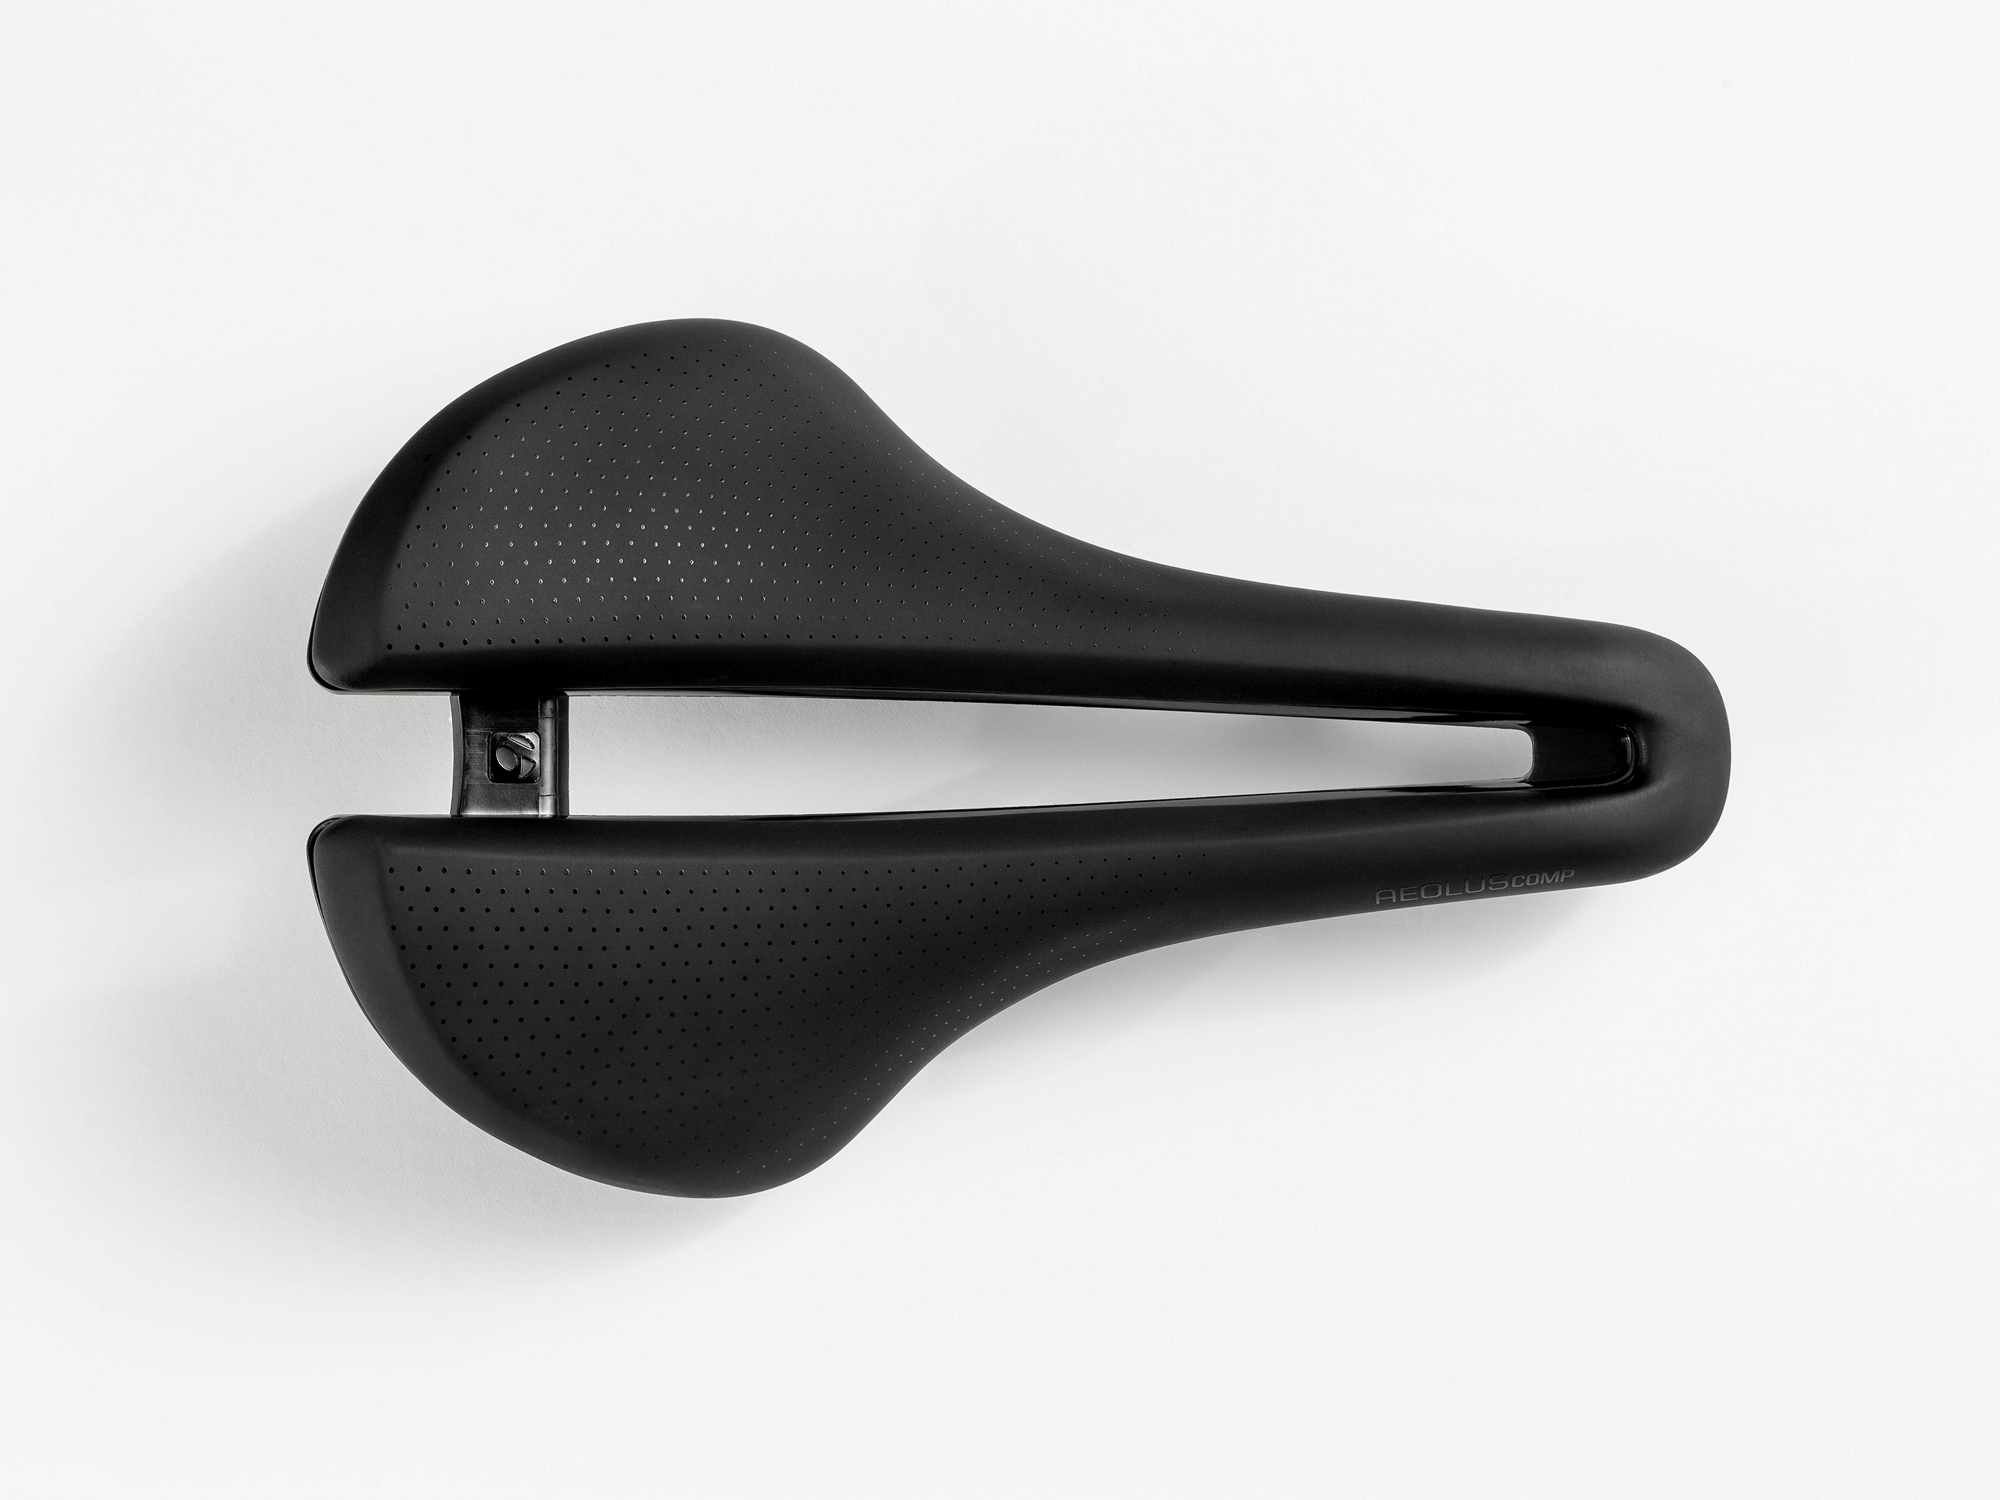 <a href="https://cycles-clement.be/product/selle-bont-aeolus-comp-155-mm-black/">SELLE BONT AEOLUS COMP 155 MM BLACK</a>